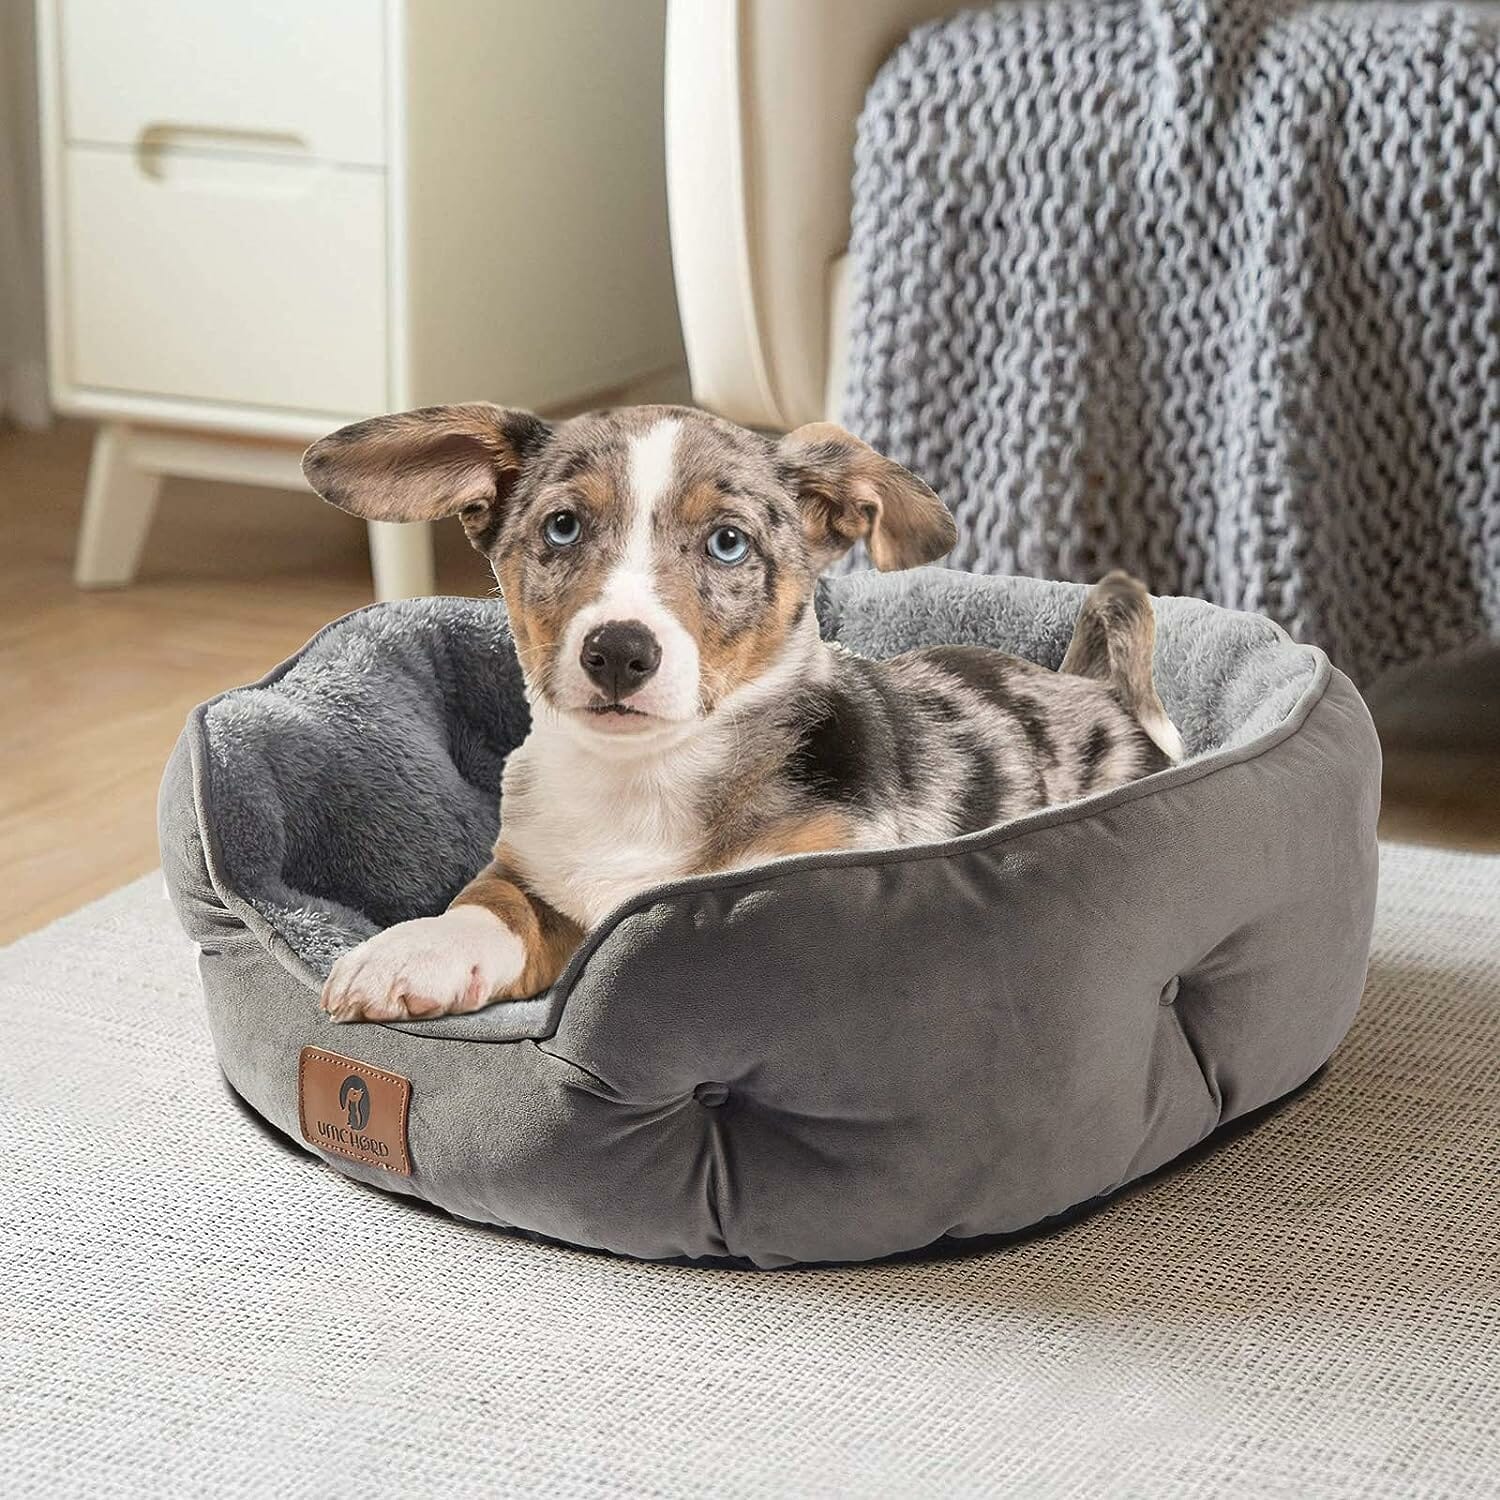 Asvin Small Dog Bed Review: The Ideal Cozy Spot for Your Pup?